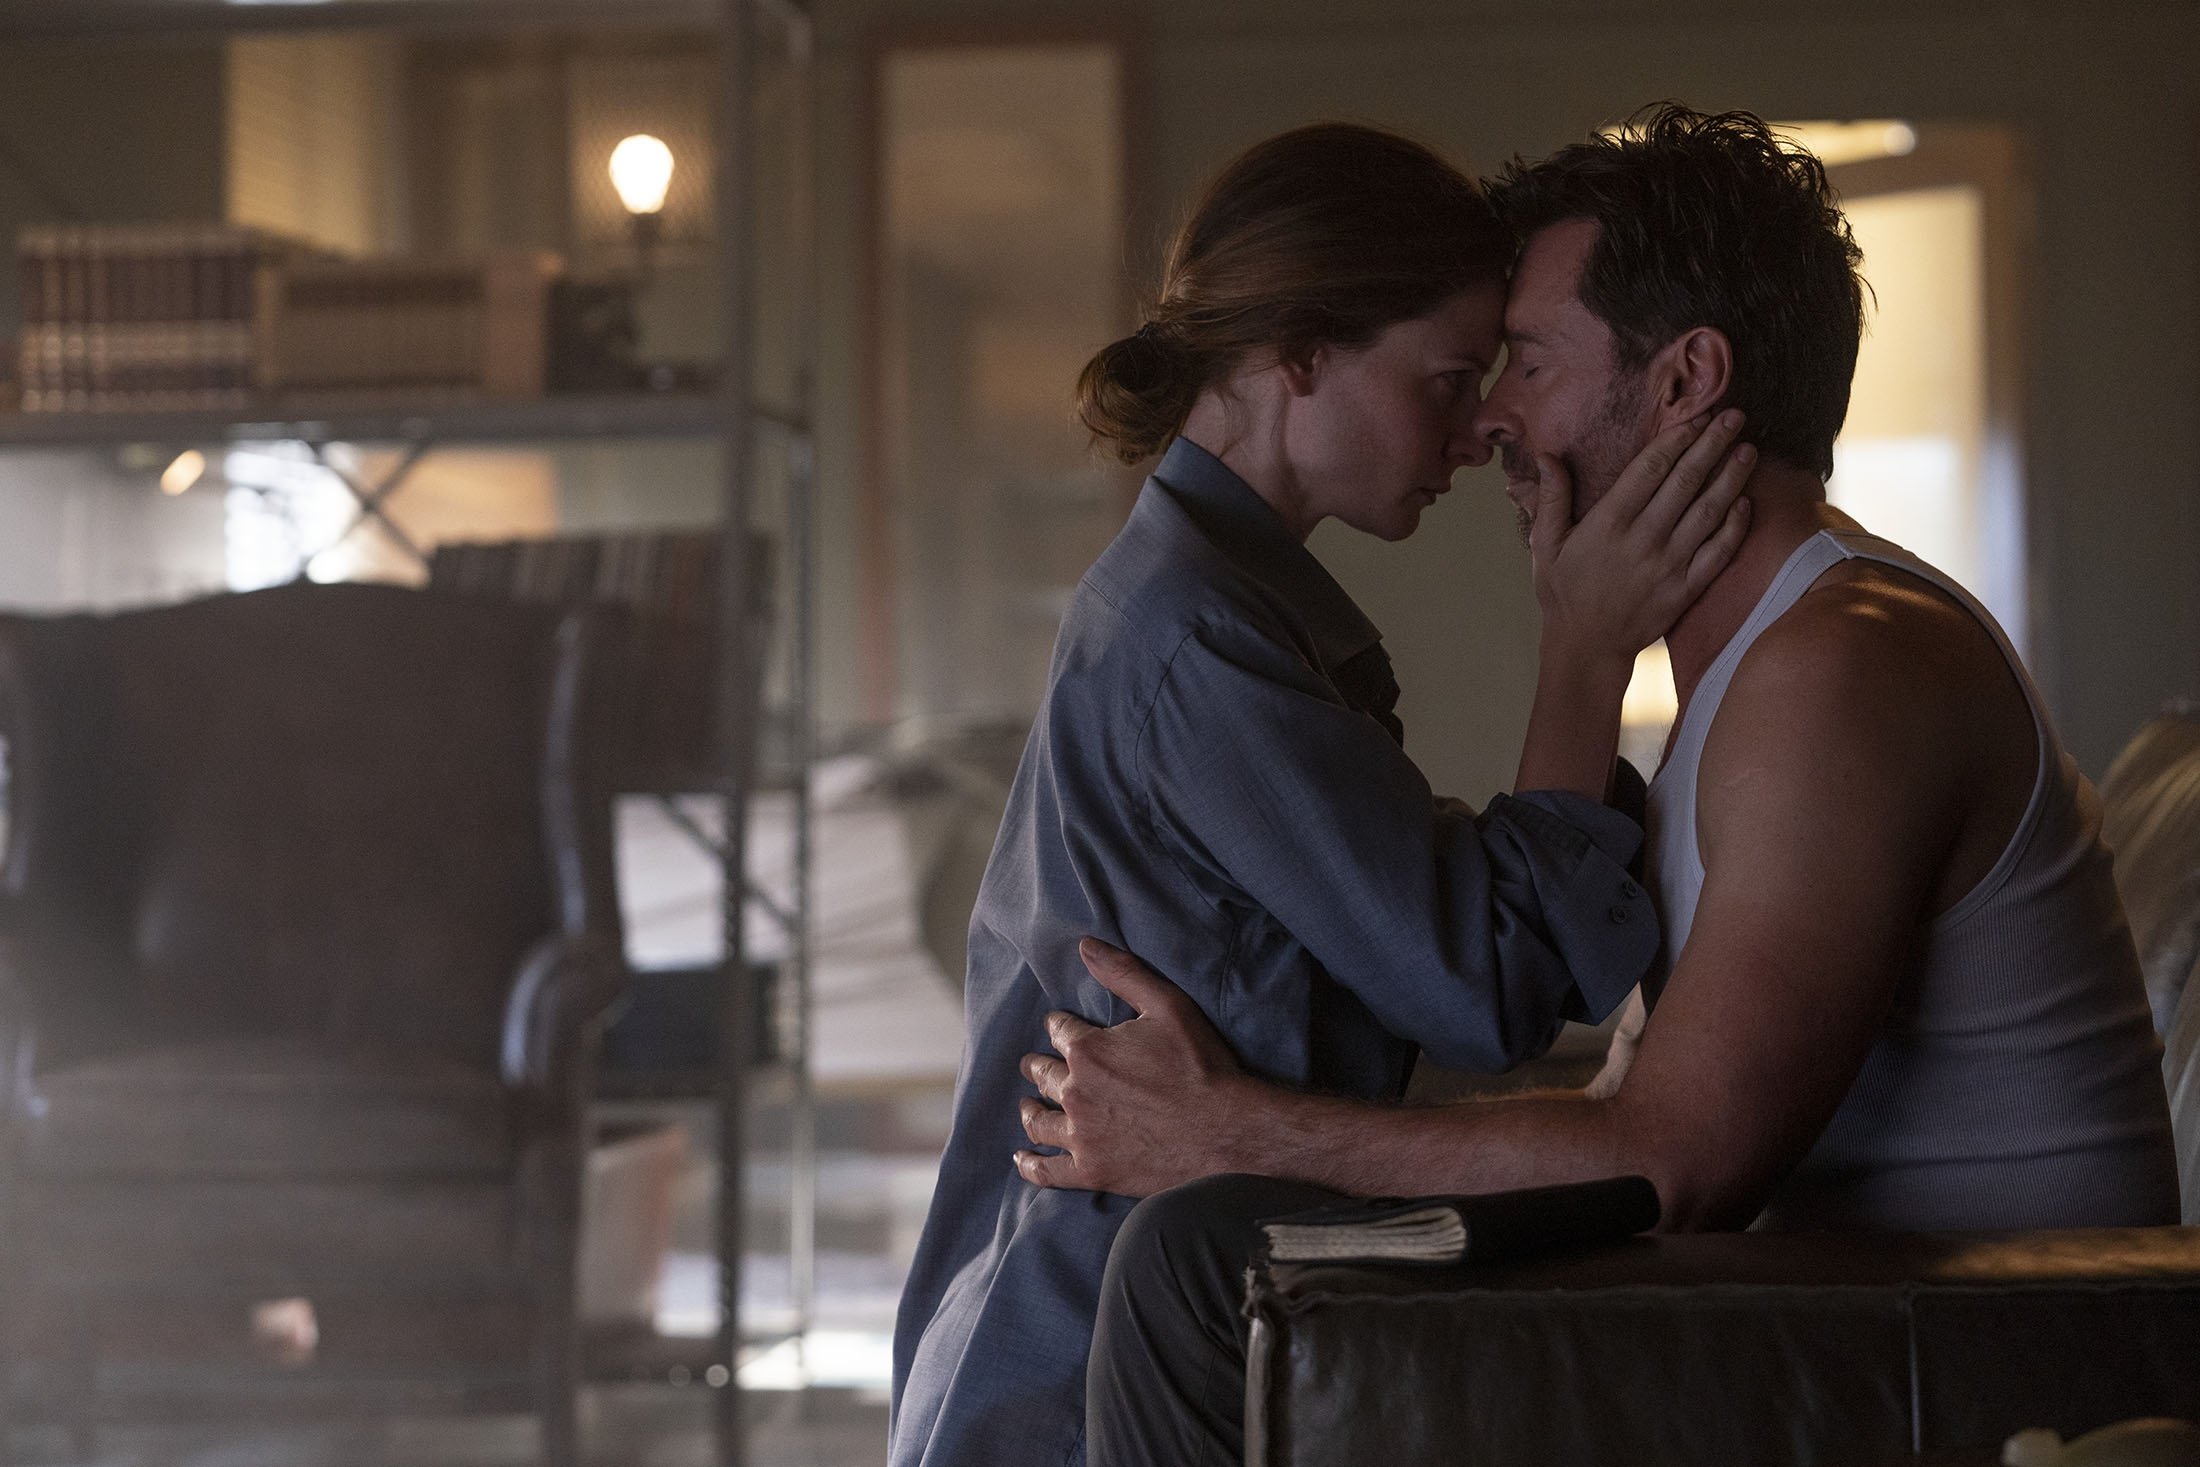 Rebecca Ferguson (L) and Hugh Jackman in a scene from the film "Reminiscence." (Warner Bros. Pictures via AP)